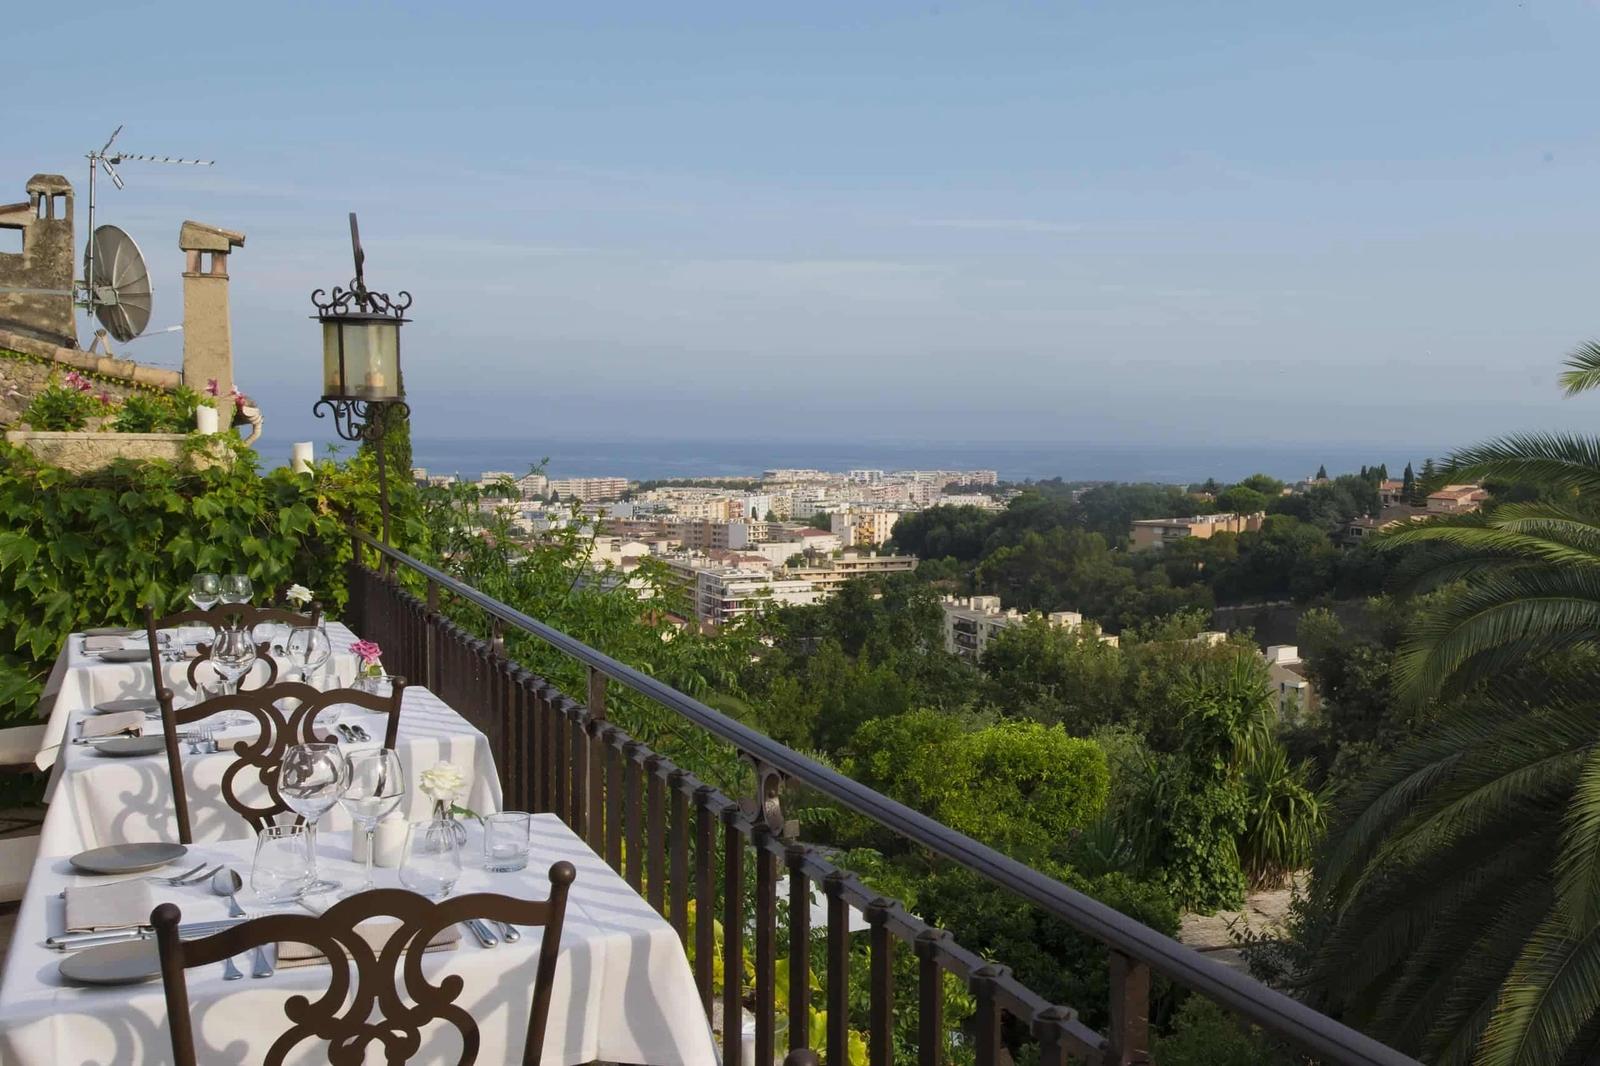 Hotels in Cote d’Azur or French Riviera